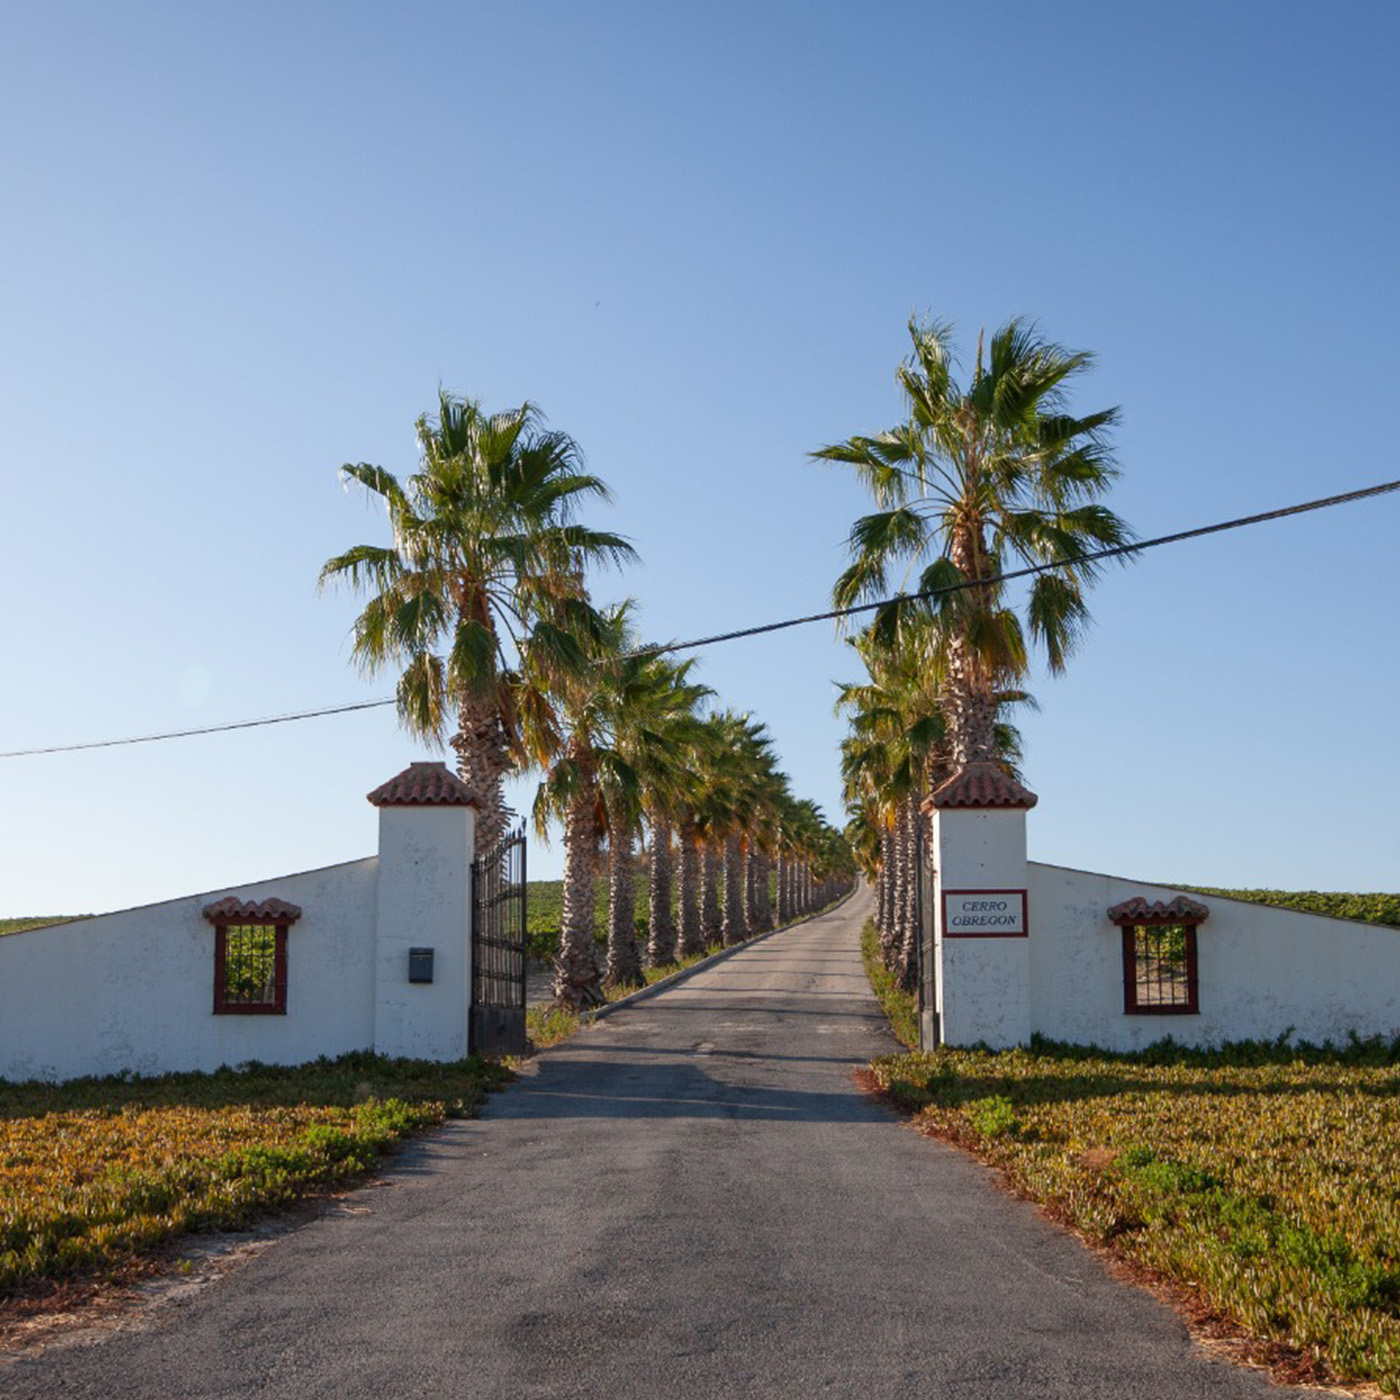 4x4 route through the vineyards of the Jerez area and winery 2 - Rutasiete